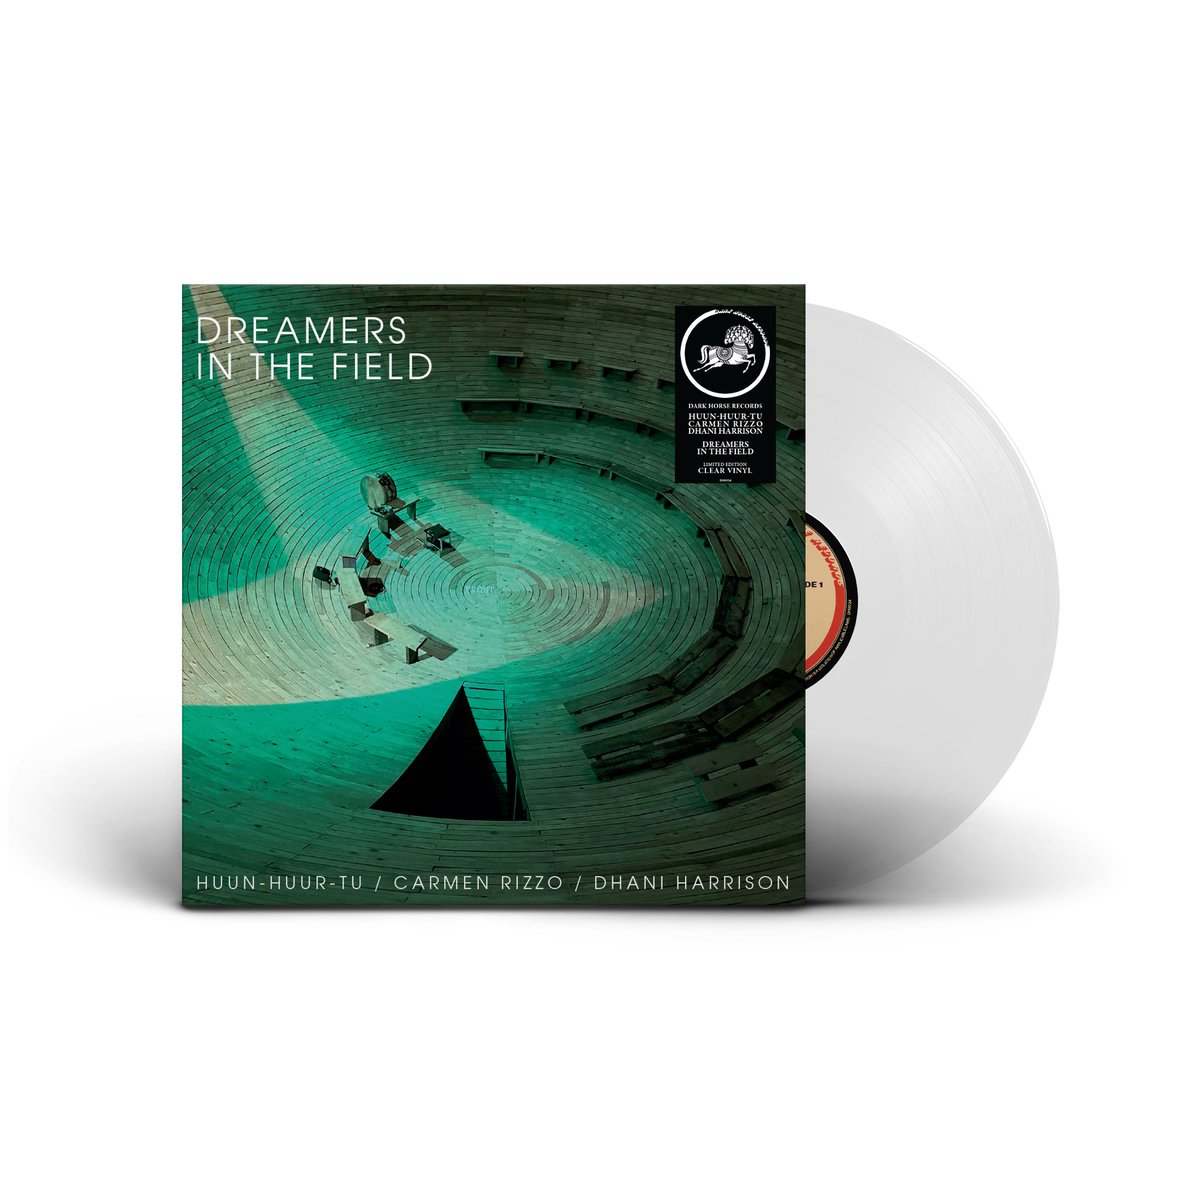 Support your local indie store this weekend for @recordstoreday and pick up the limited Clear Vinyl edition of the new Huun-Huur-Tu/@carmenrizzo /Dhani Harrison album, ‘Dreamers in the Field’. Go to recordstoreday.com to find out more. #RSD2024 #RSD24 #RecordStoreDay2024